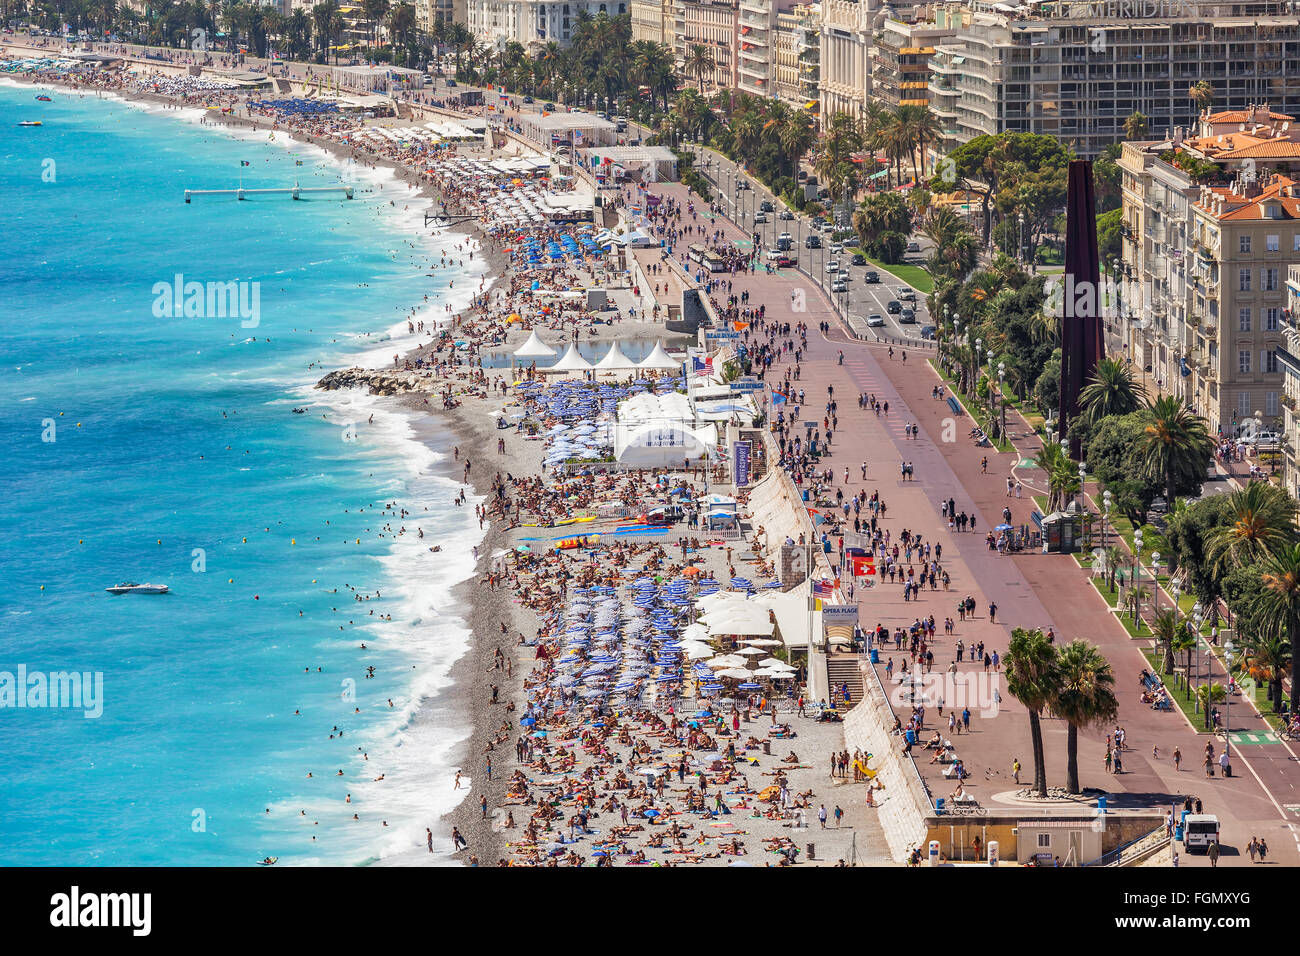 View from above on beach and promenade in Nice, France. Stock Photo